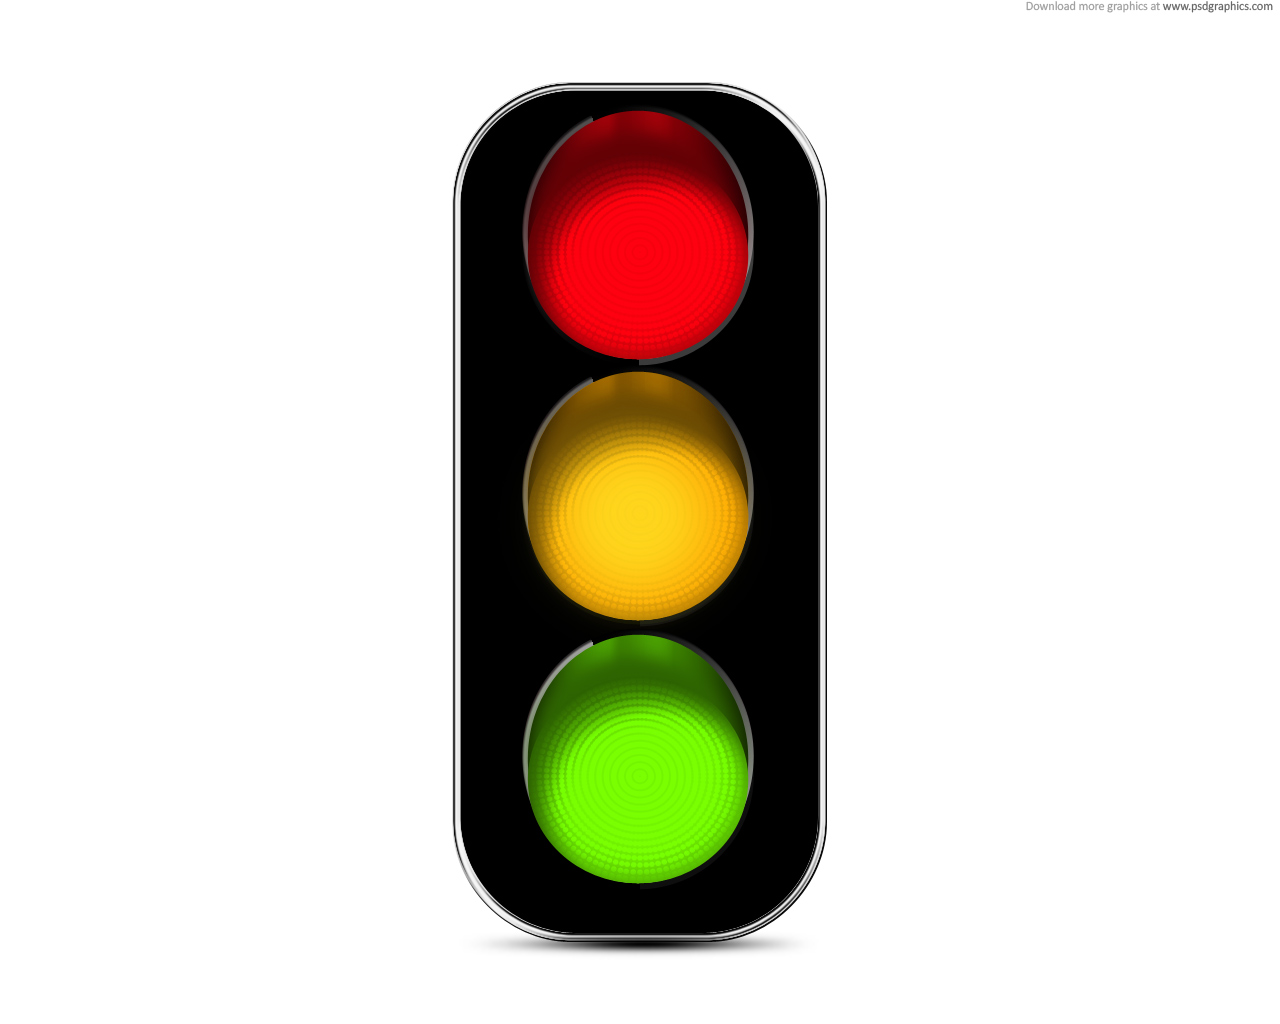 Traffic Signal Images - ClipArt Best